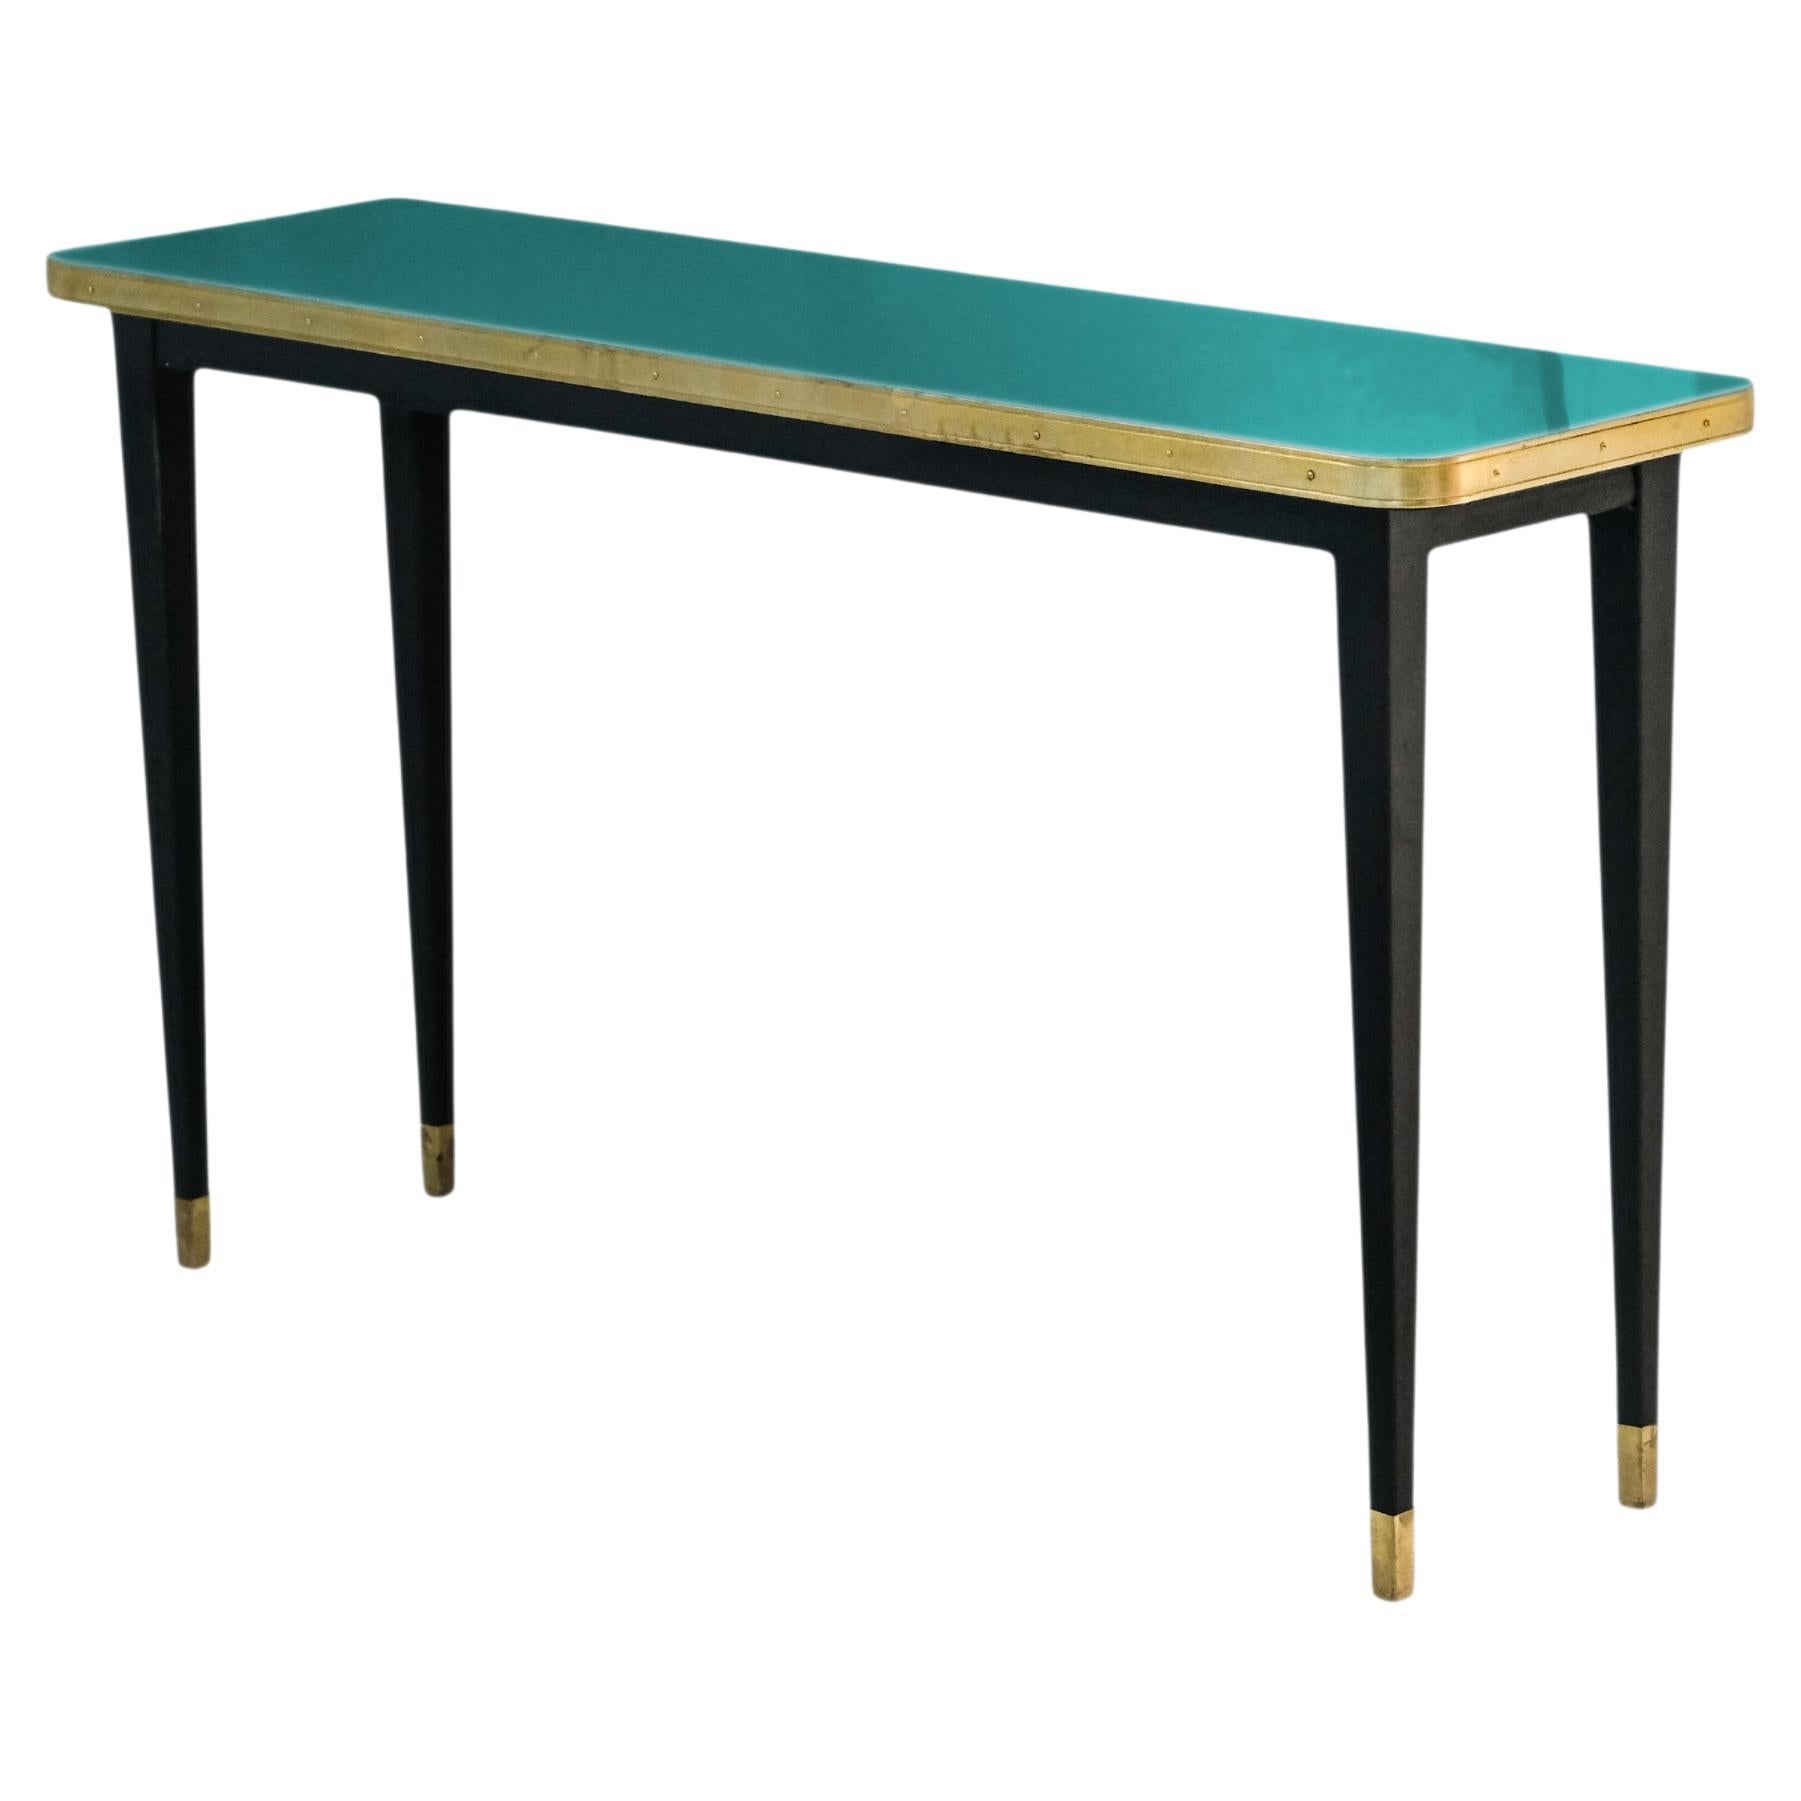 Julieta Collection. 

Console Table with High Gloss Top, Brass Tape Framed, Black Powder Coating Conical Legs with Brass End

Introducing the stunning console table with black powder-coated steel construction, boasting sleek conical legs with brass